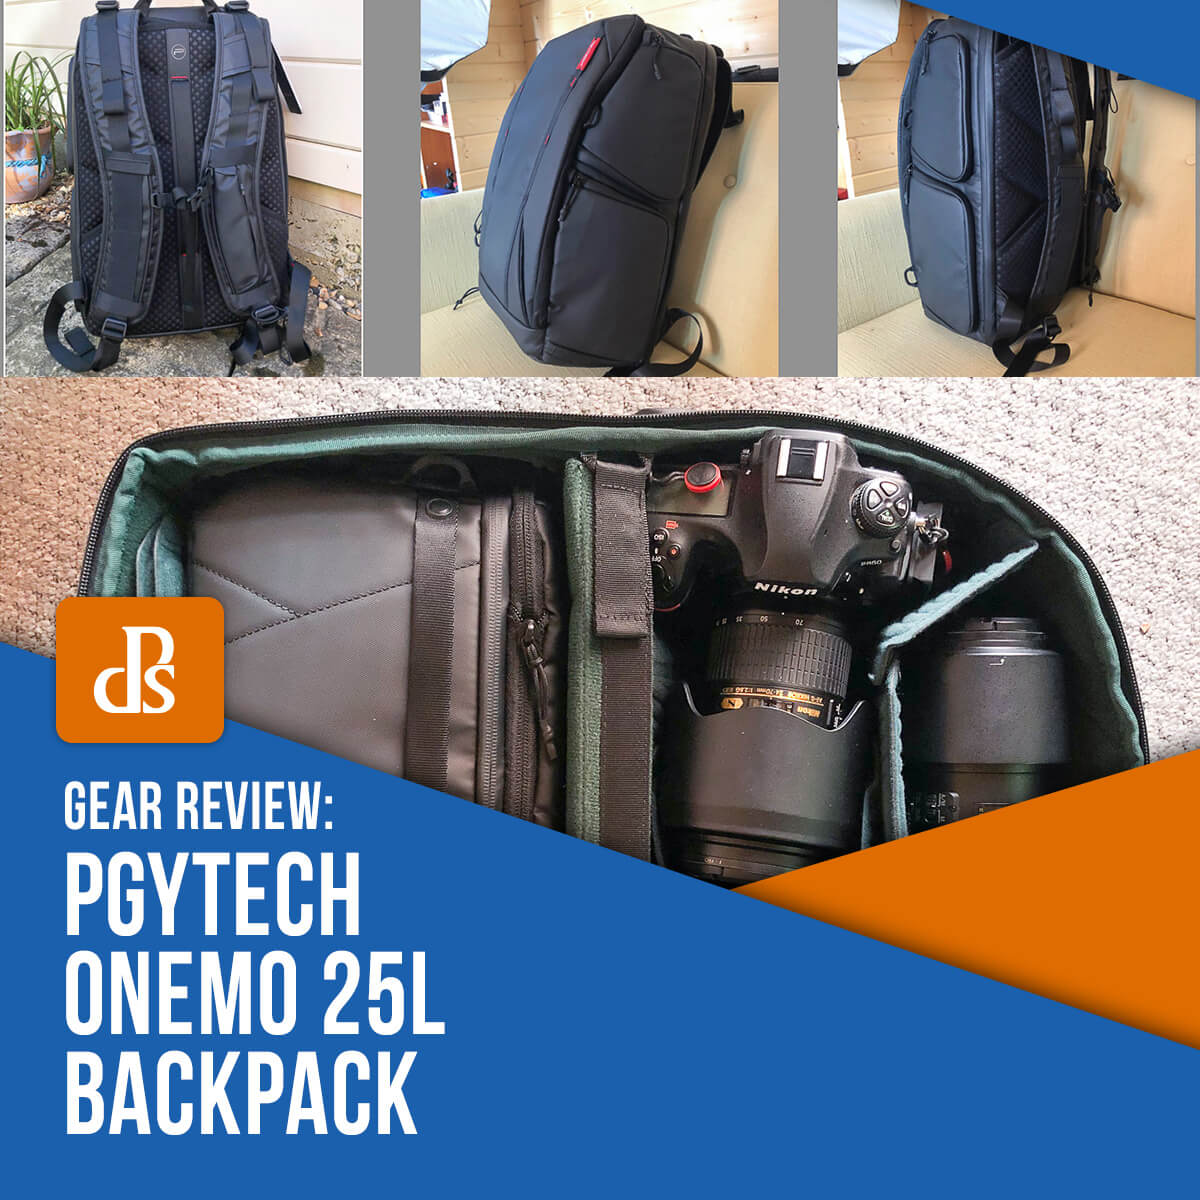 dps-pgytech-onemo-25l-backpack-review